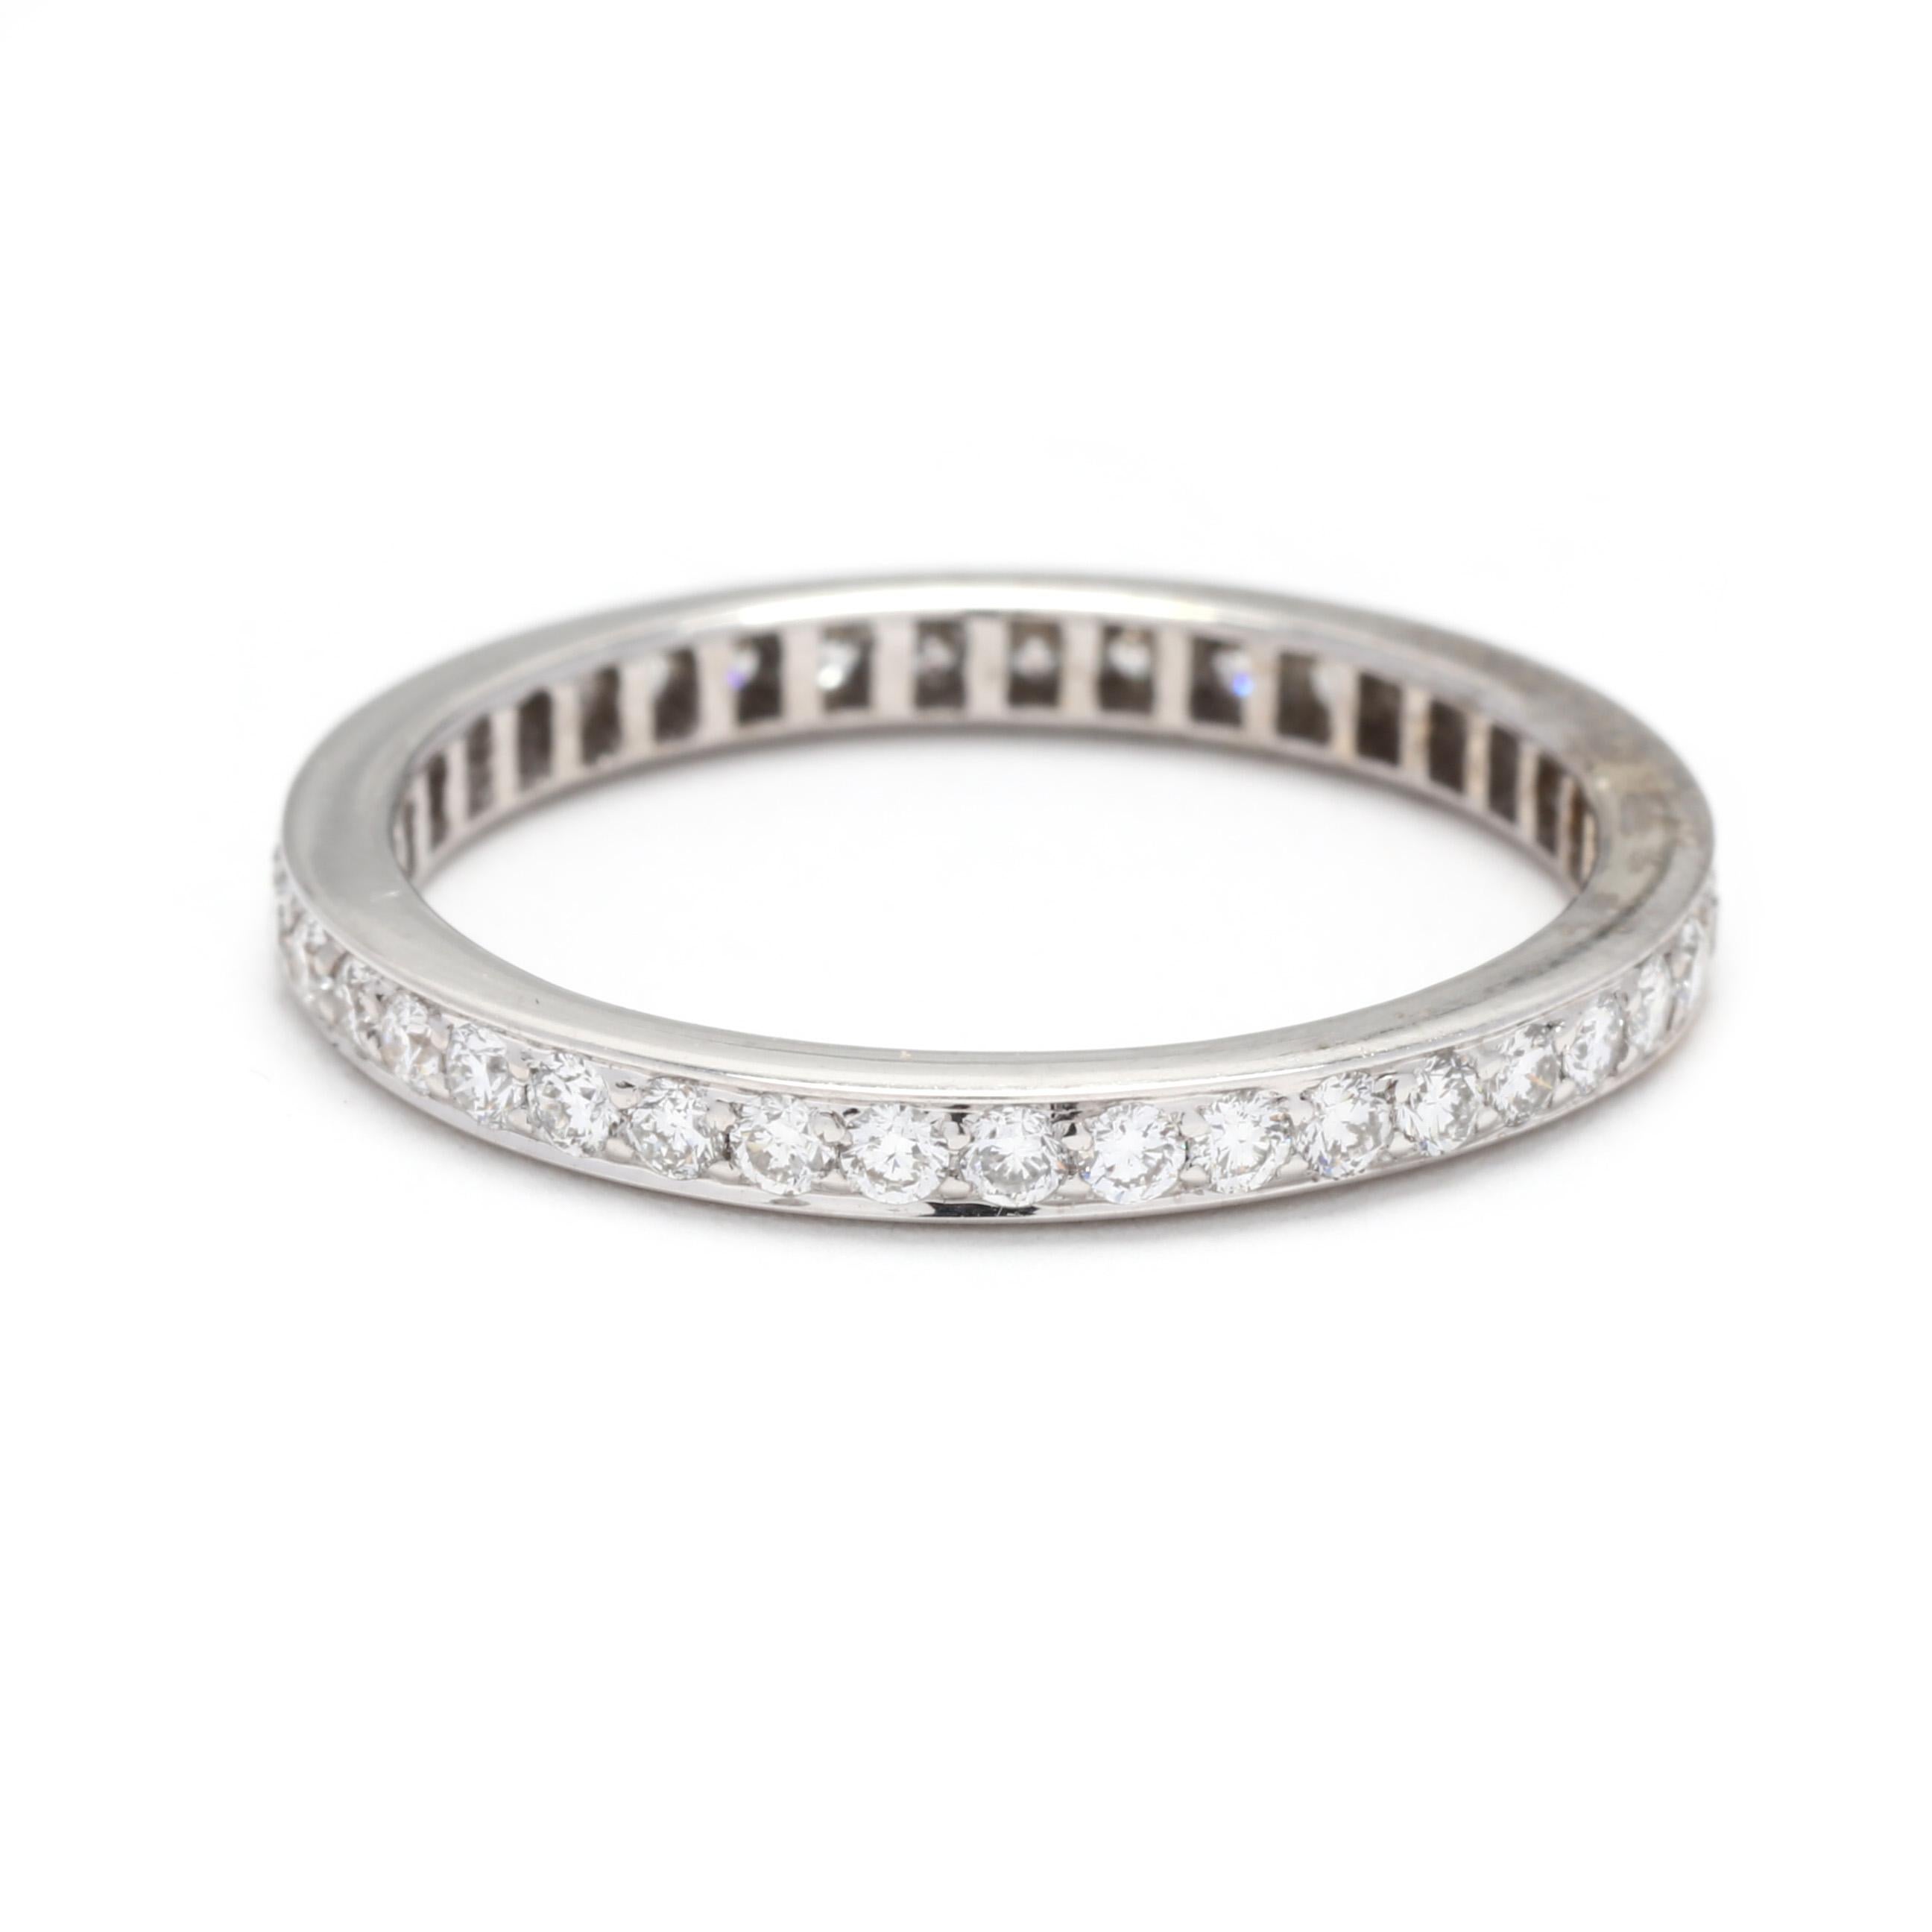 A vintag 18 karat white gold thin diamond eternity wedding band. This stackable band features an eternity design with pavé set round brilliant cut diamonds weighing approximately .56 total carats and a slightly raised edge.

Stones: 
- diamonds
-